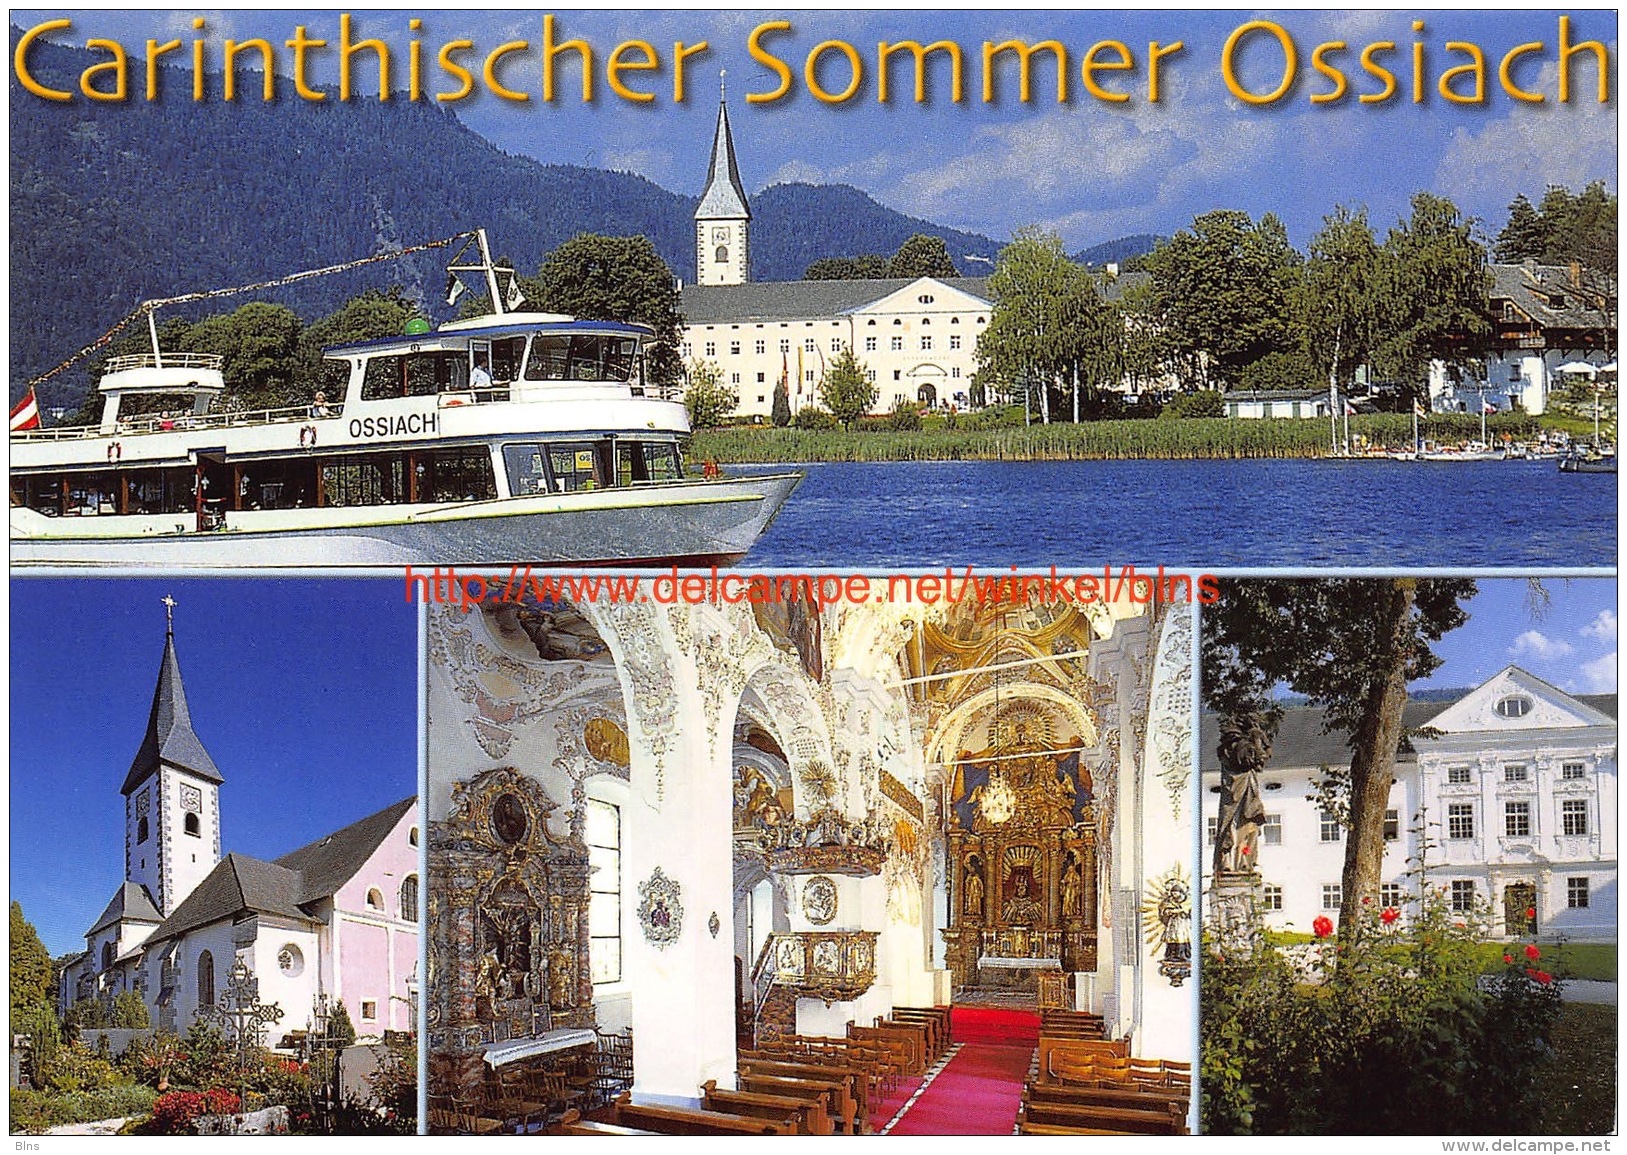 Carinthischer Sommer Ossiach - Ossiachersee-Orte